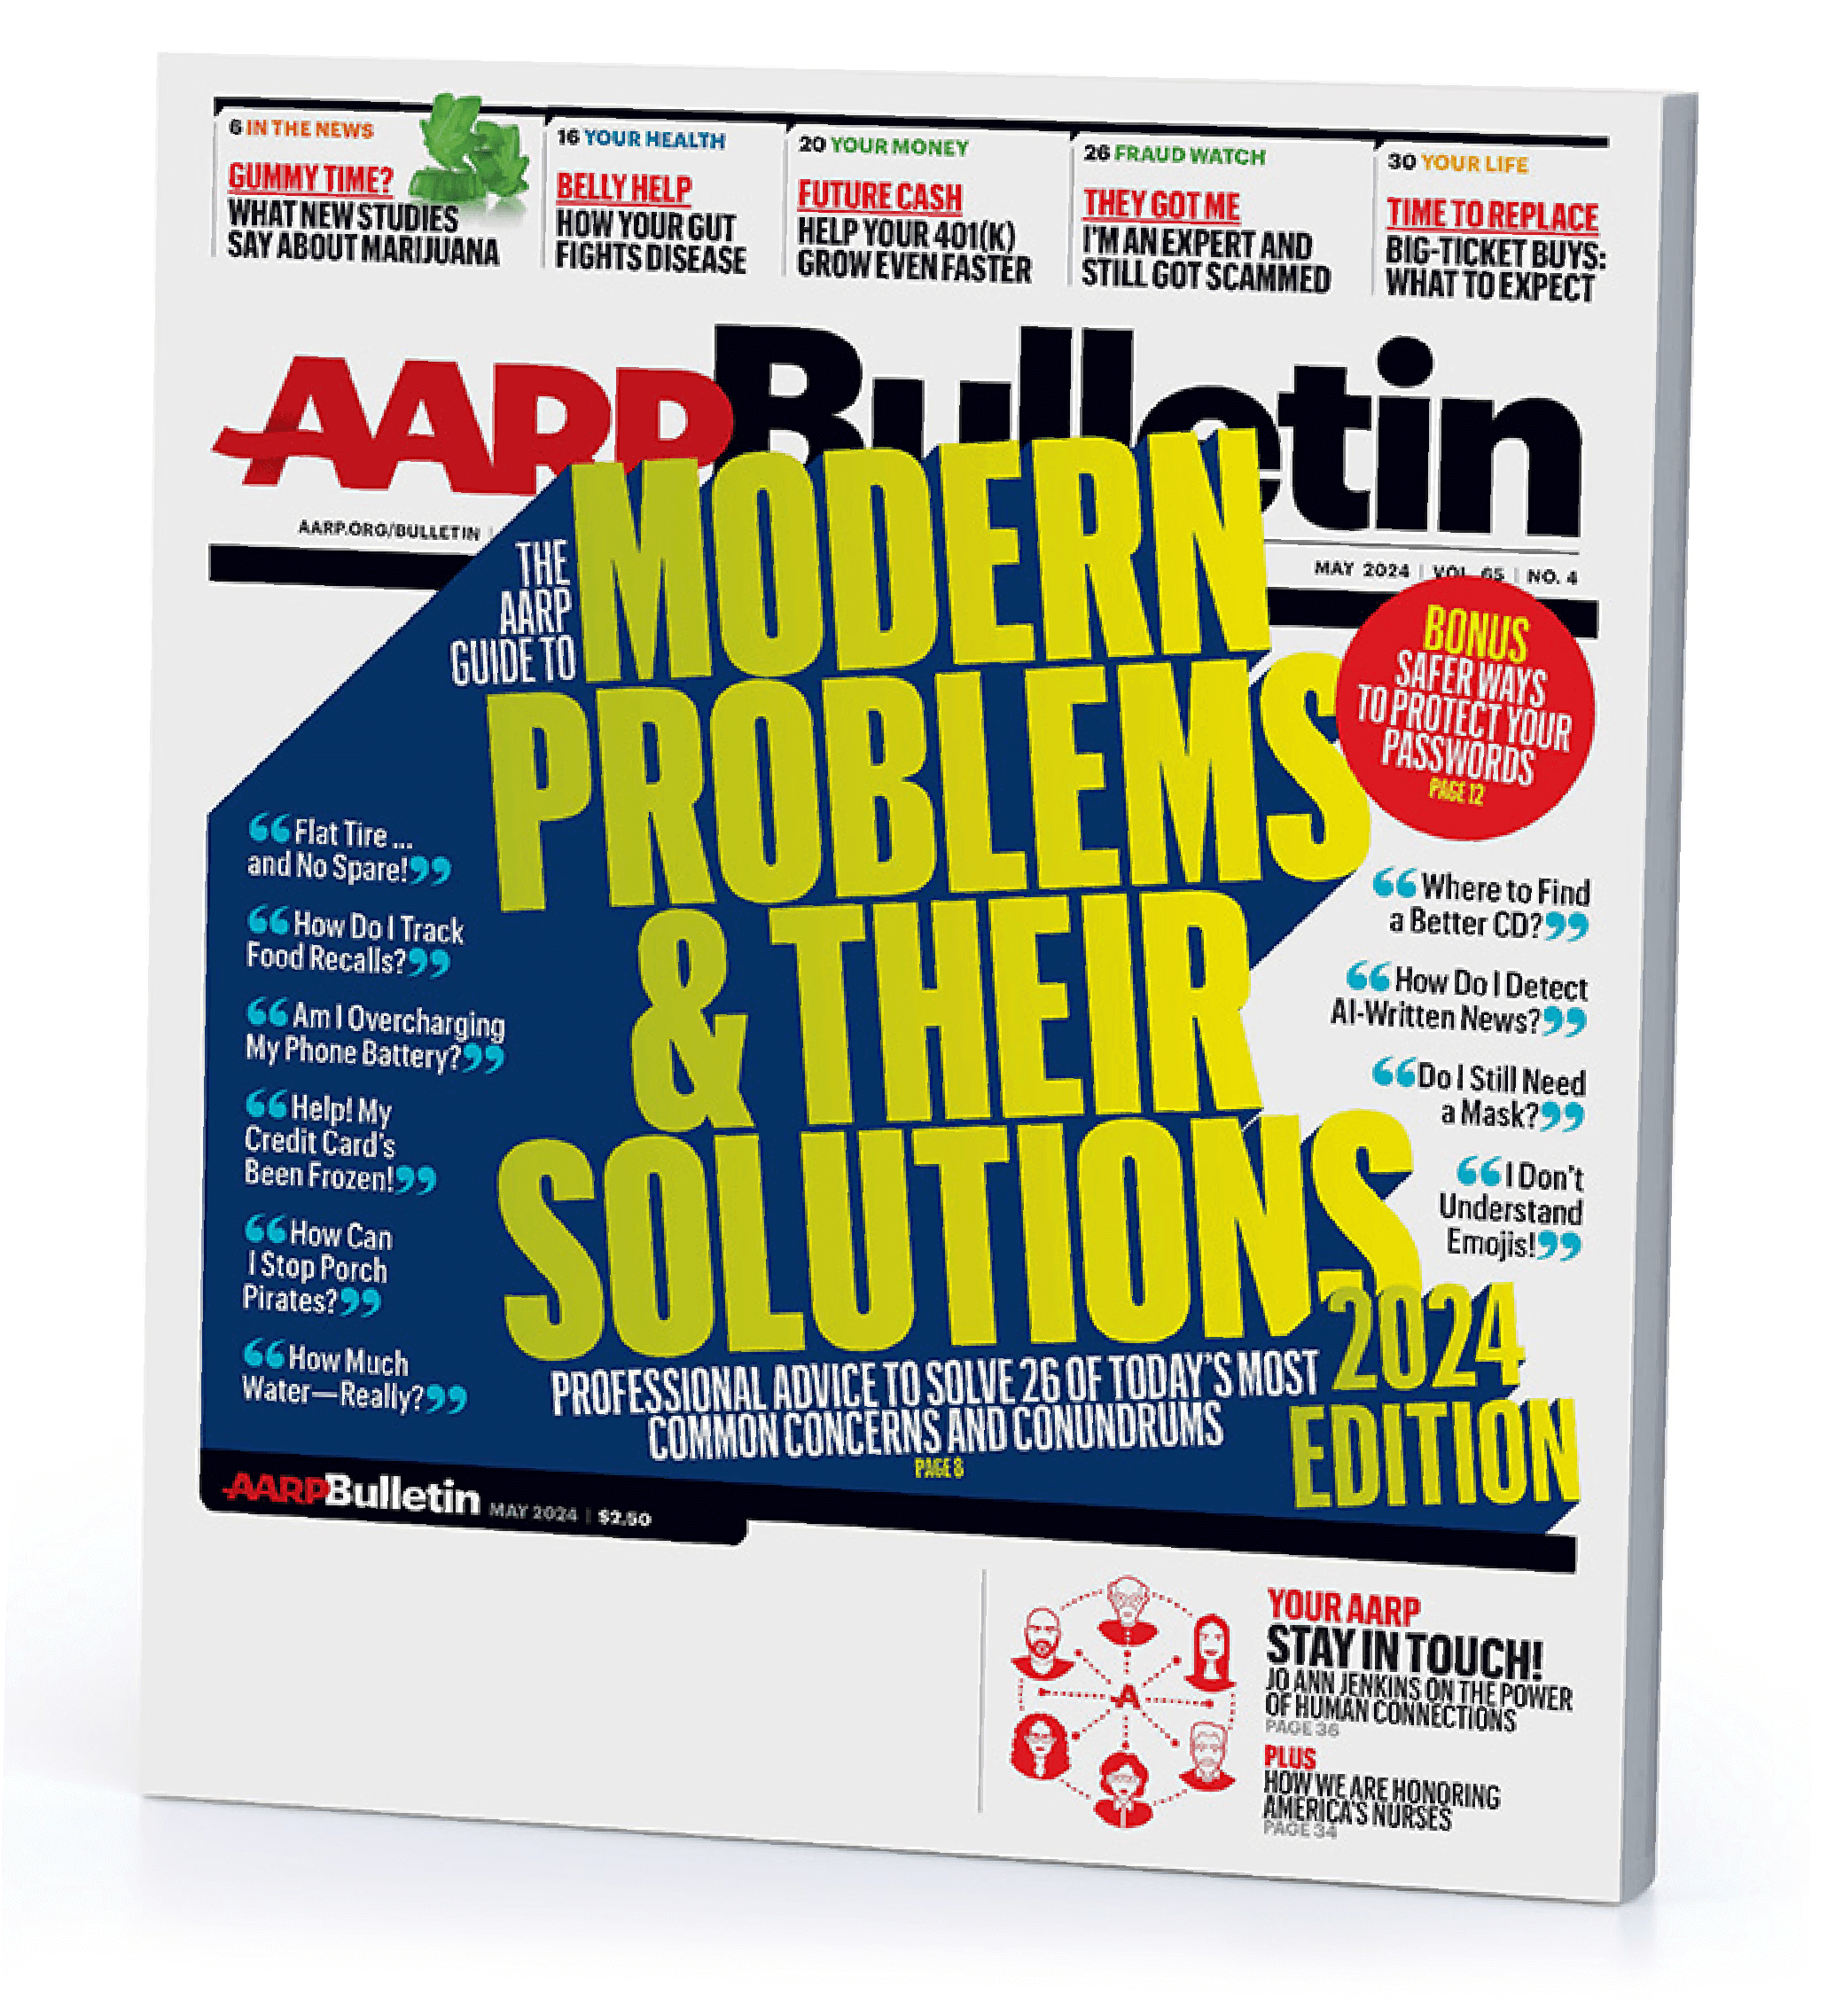 AARP Bulletin May 2025 cover